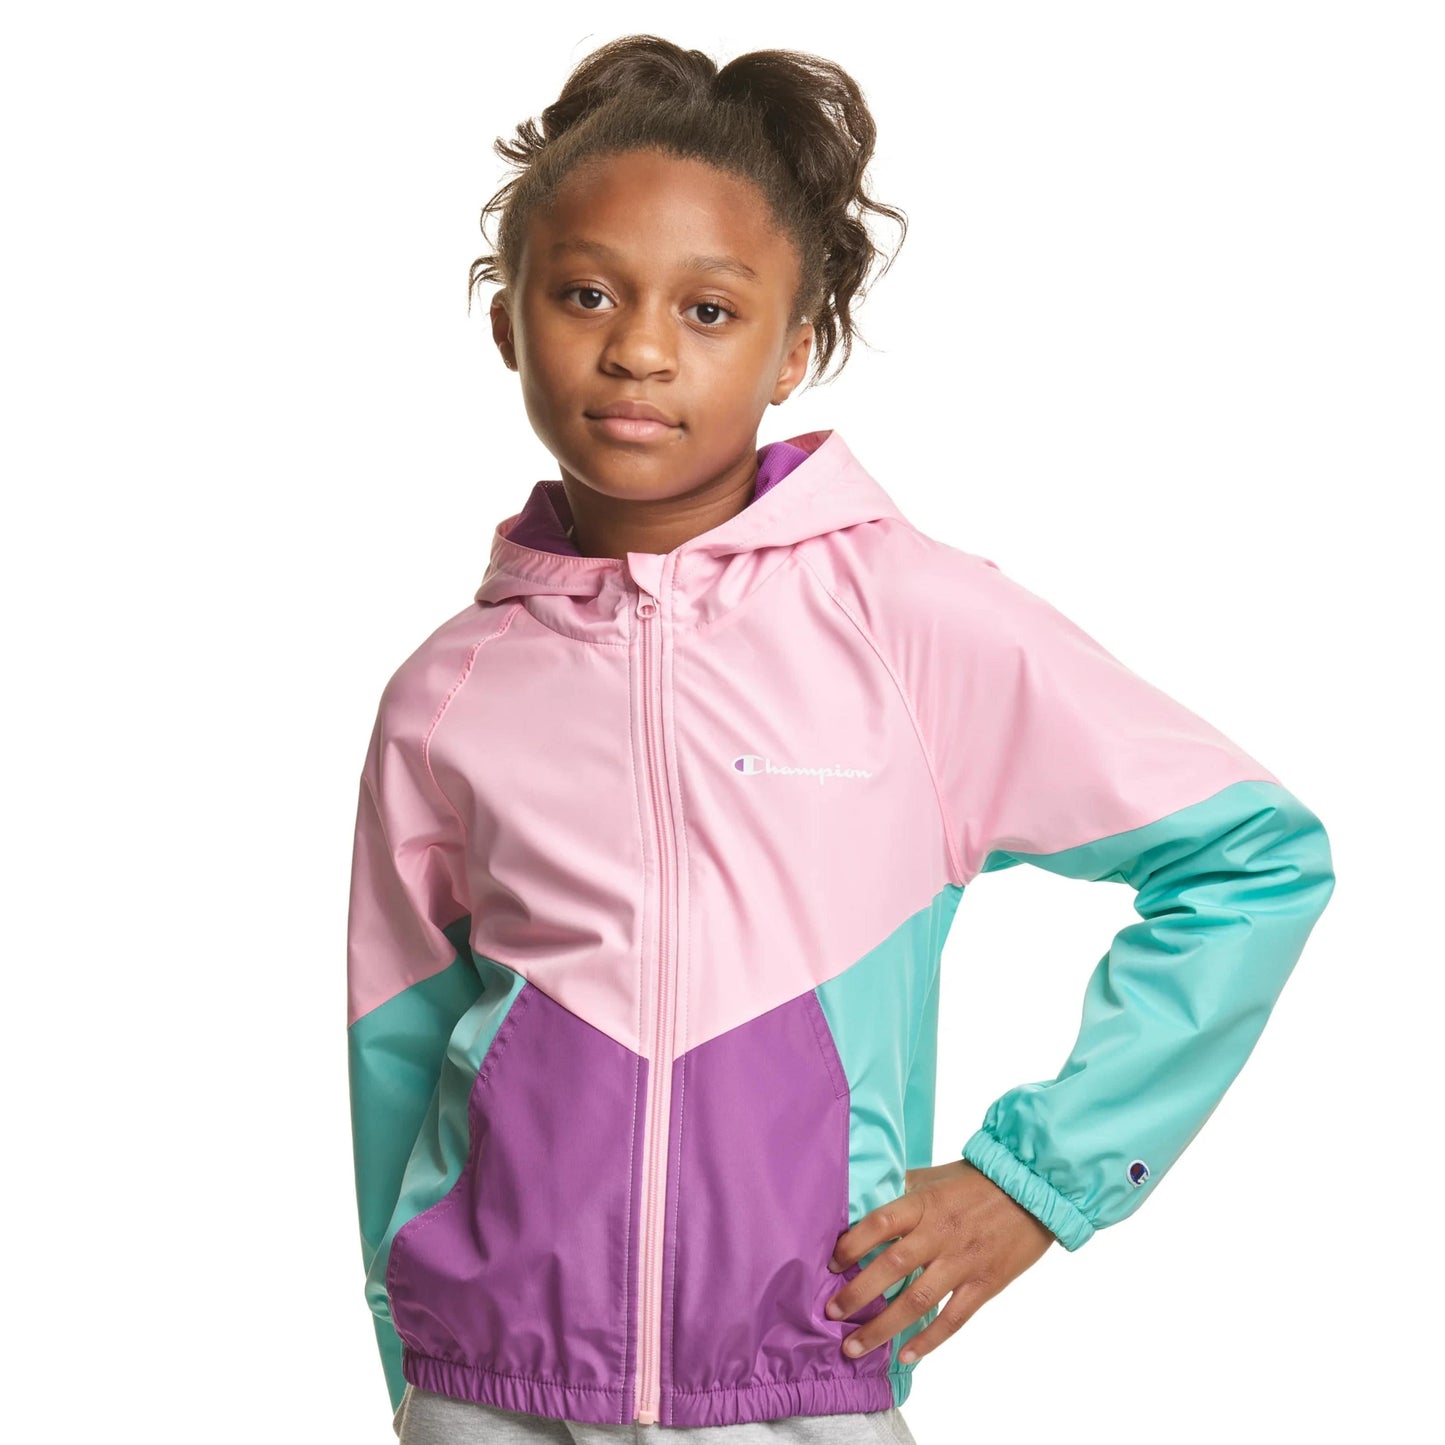 CHAMPION 2 Years / Multi-Color CHAMPION - Baby - Athletic Apparel